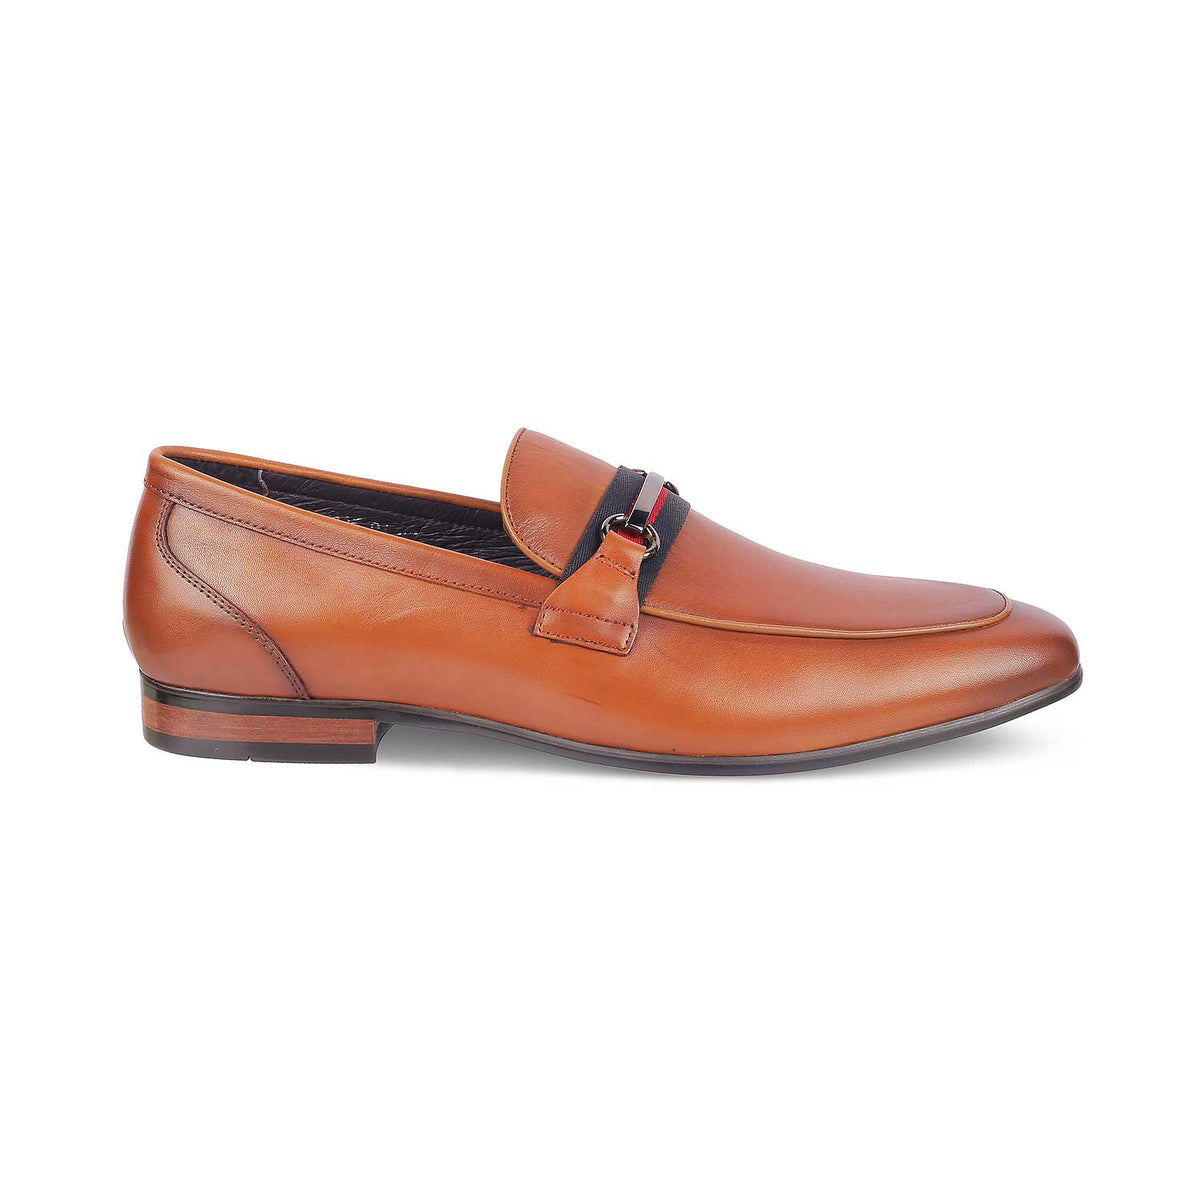 Tresmode Merci Brown Men's Leather Loafers - Tresmode